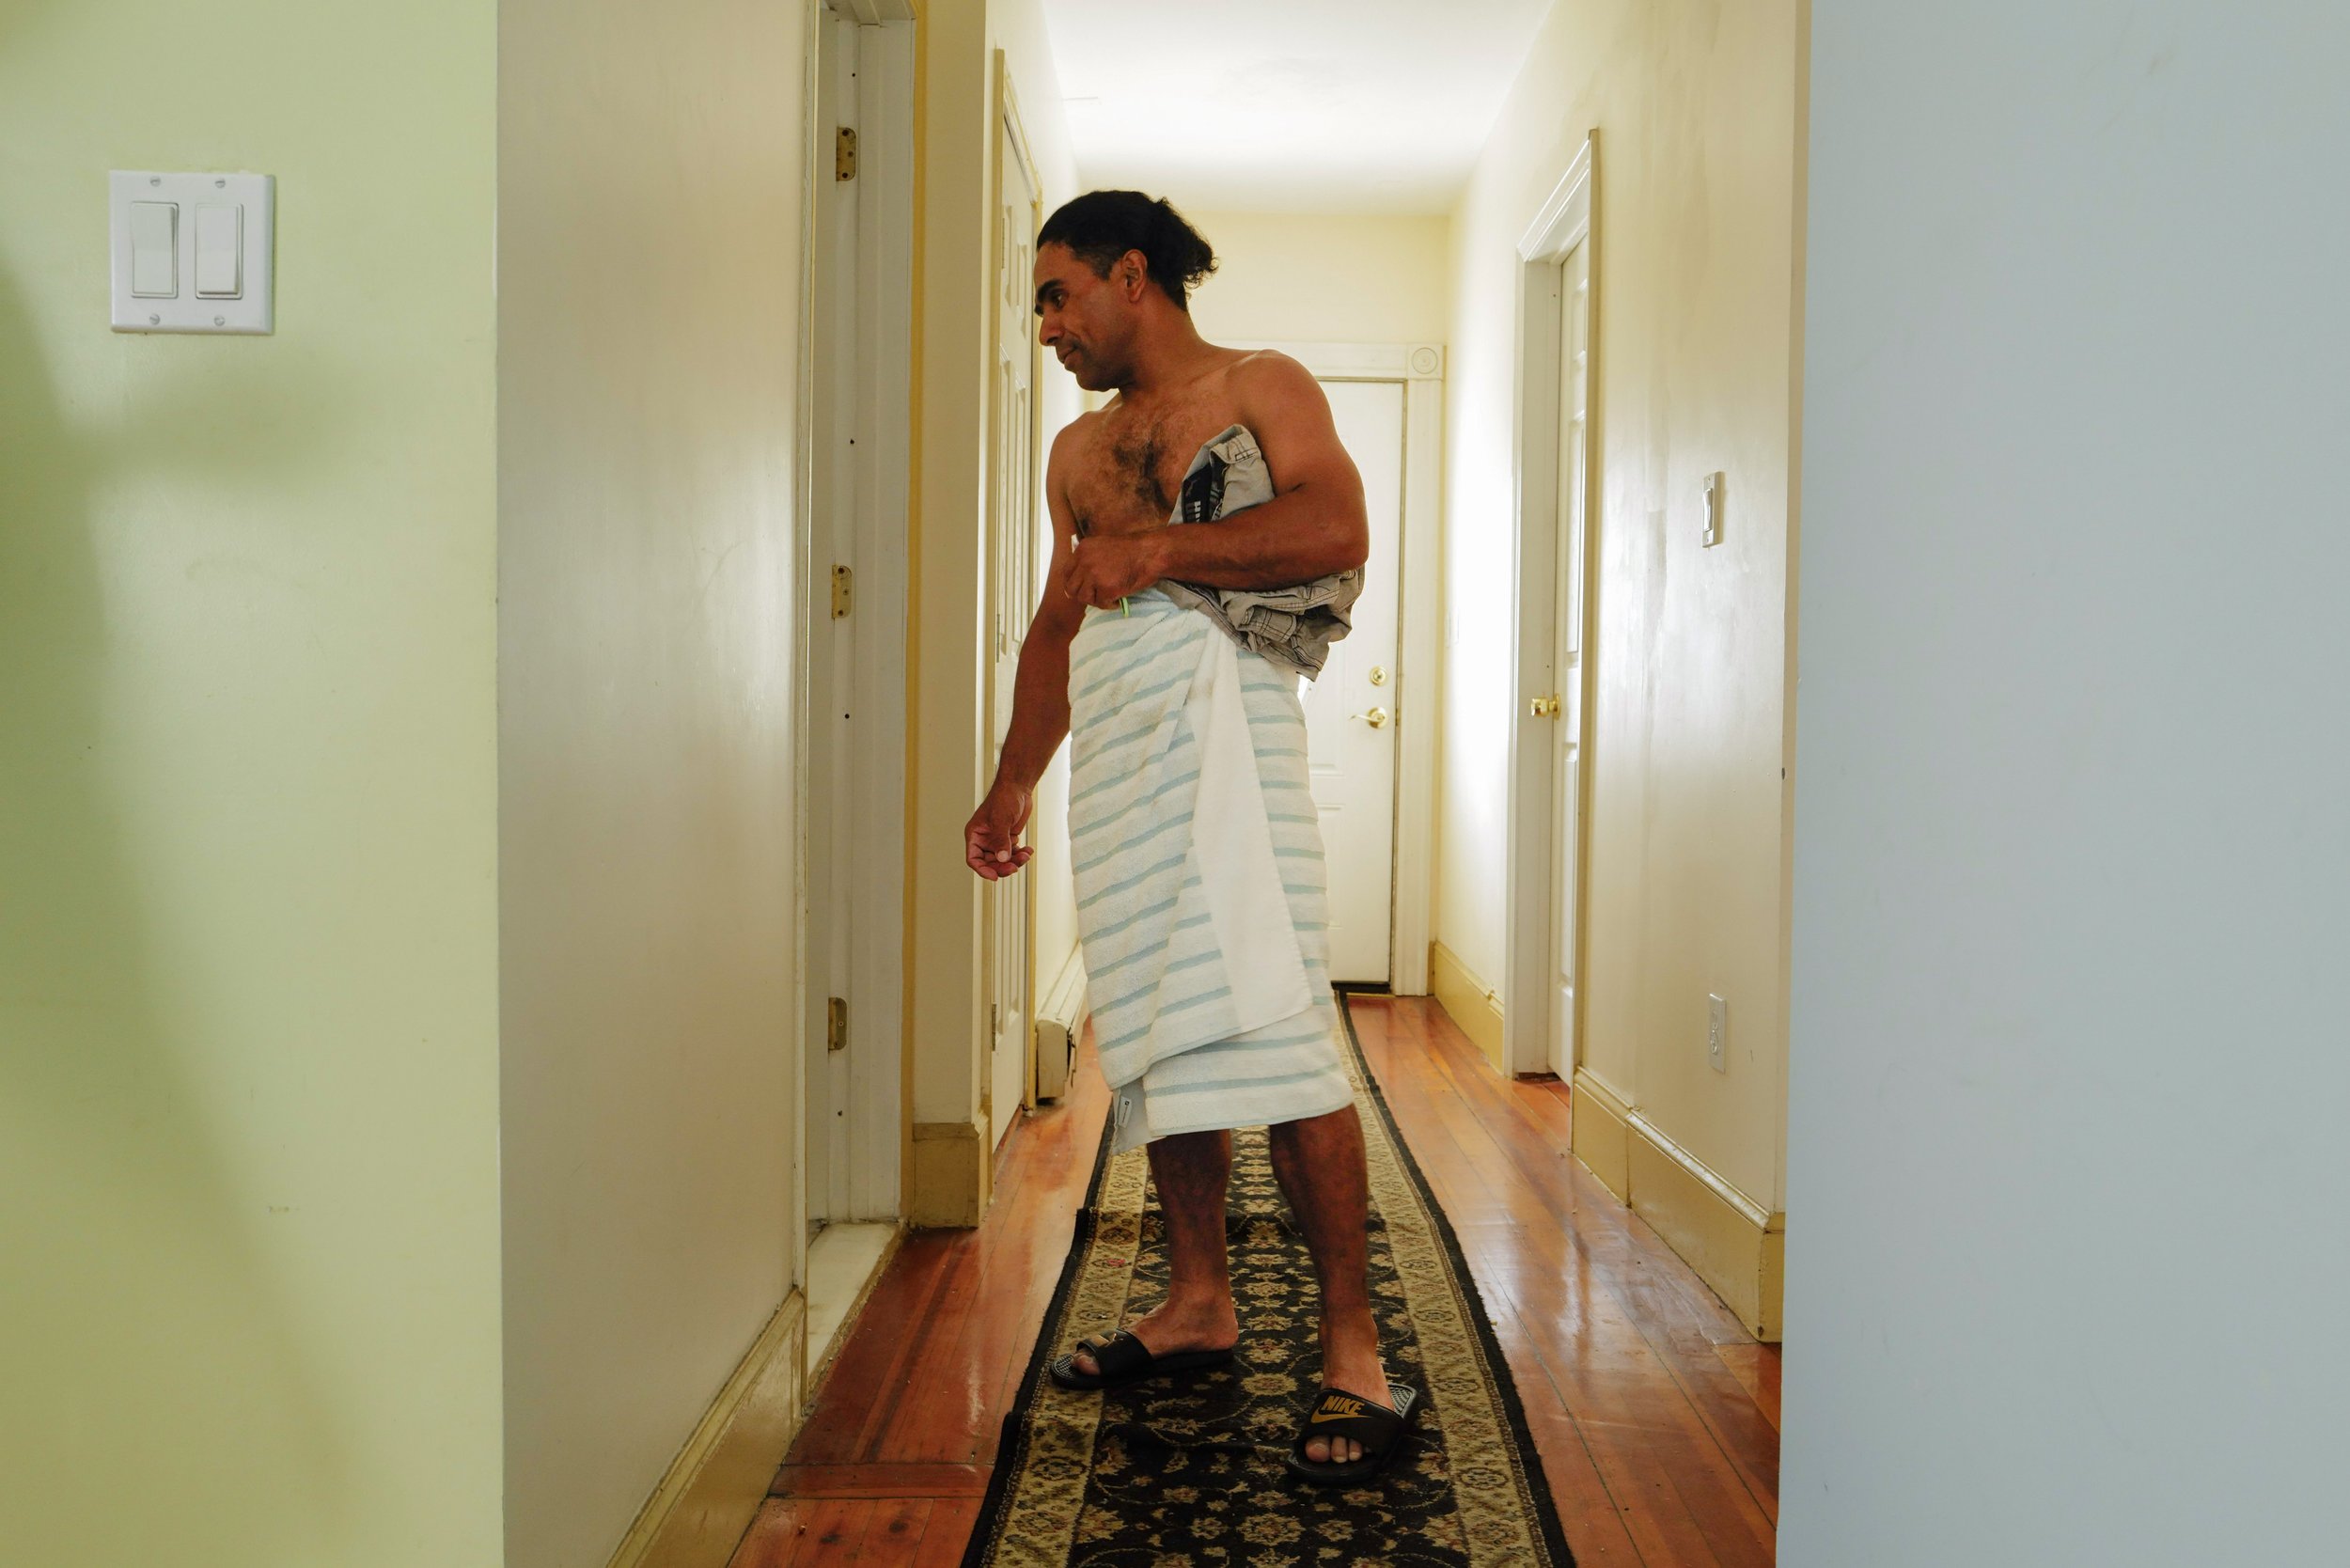  Manuel waits to use the shower shared with 12 tenants while getting ready to head to one of his two jobs at the old residence in Somerville, Mass. on August 31, 2022. 